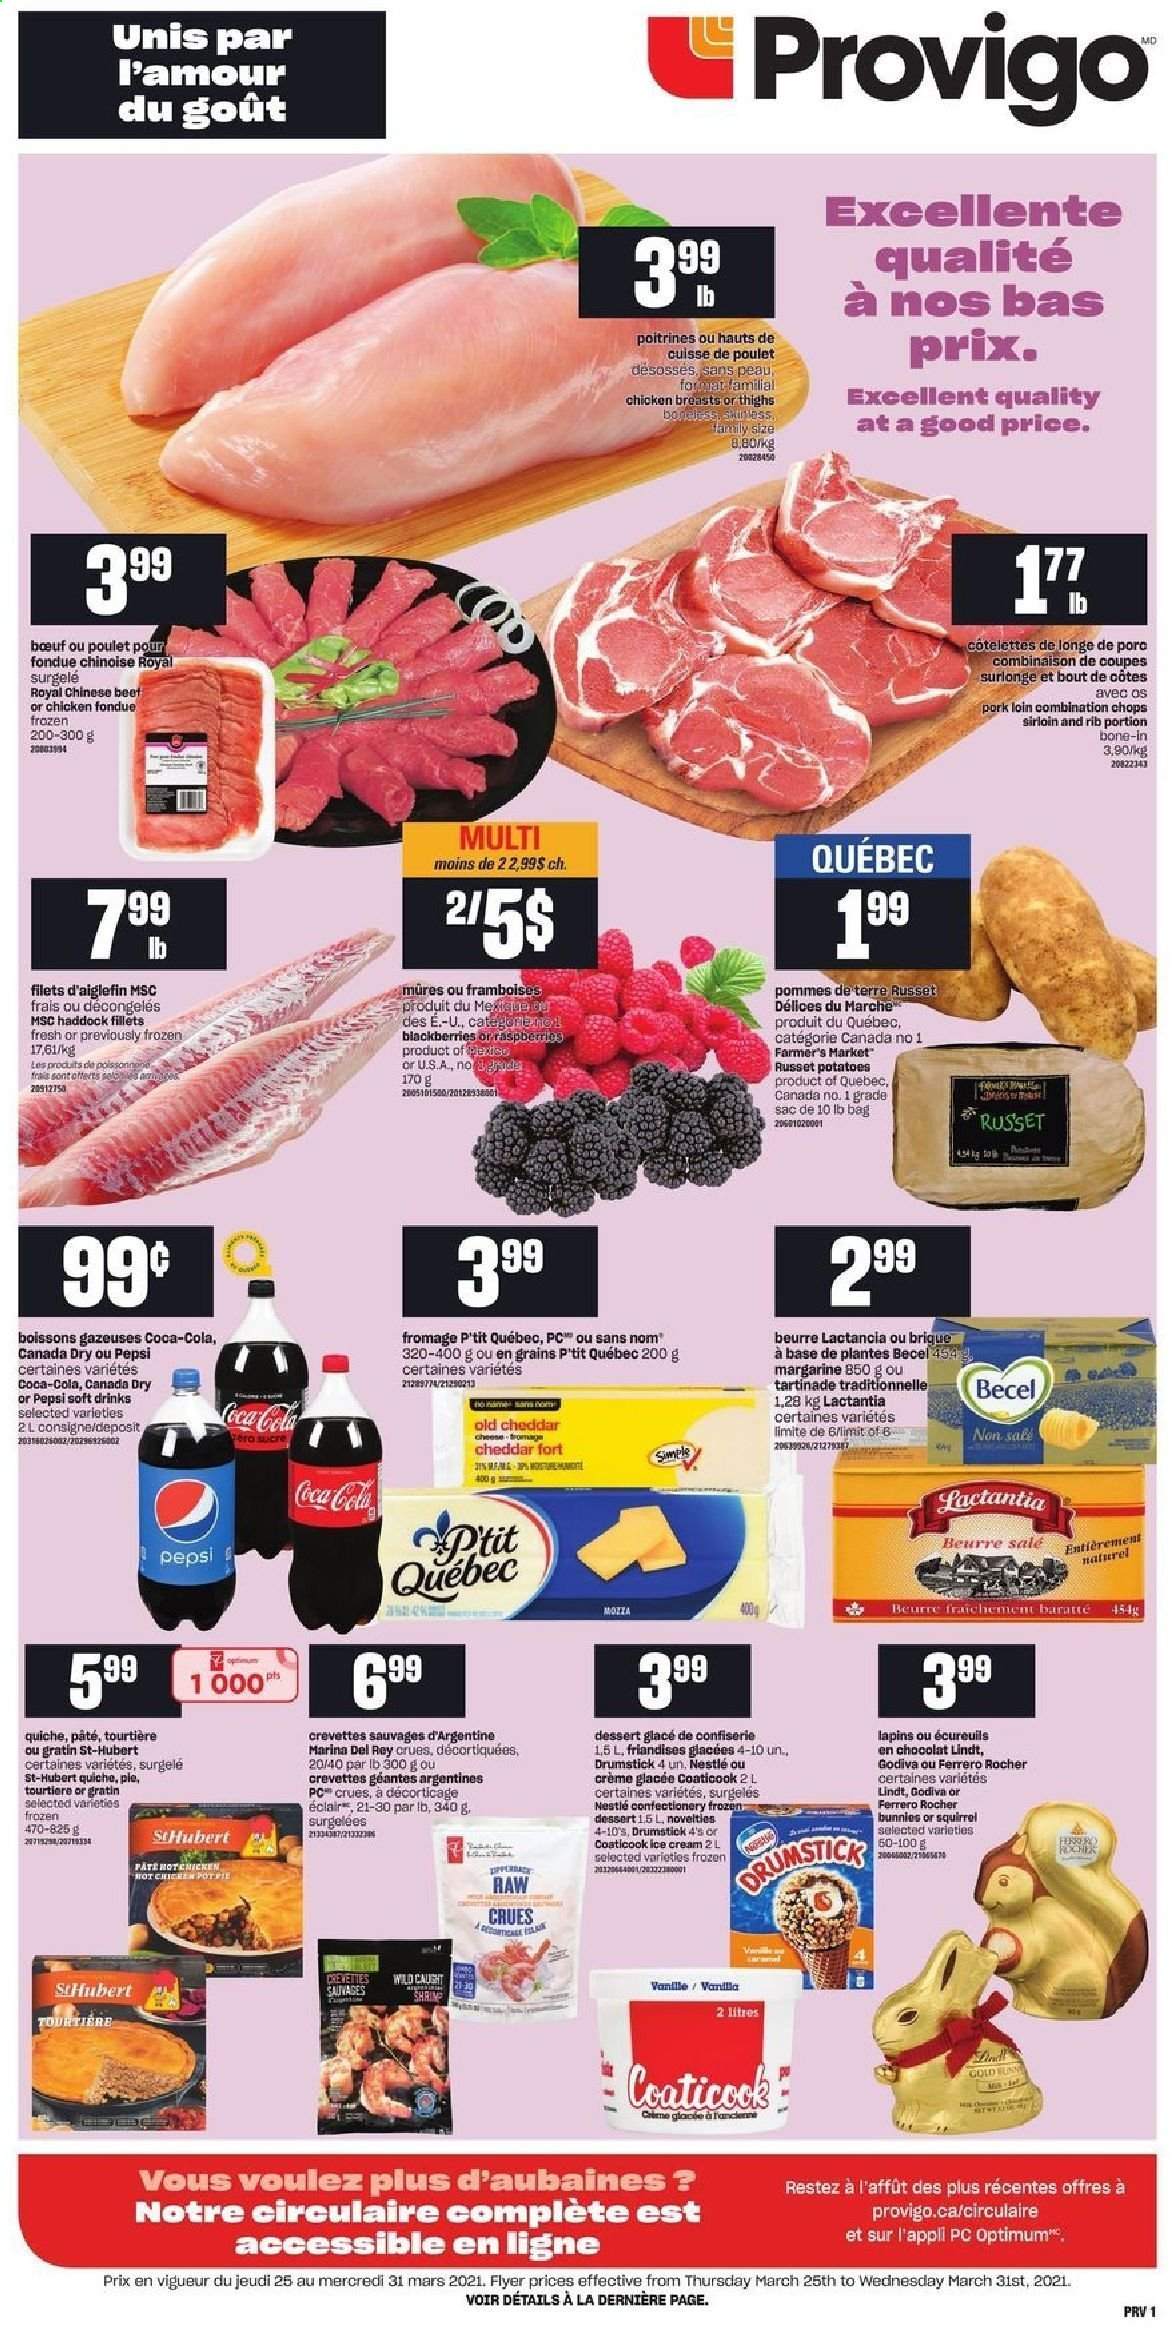 thumbnail - Provigo Flyer - March 25, 2021 - March 31, 2021 - Sales products - russet potatoes, potatoes, blackberries, haddock, cheddar, cheese, margarine, quiche, Mars, Godiva, Canada Dry, Coca-Cola, Pepsi, soft drink, pork loin, pork meat, Nestlé. Page 1.